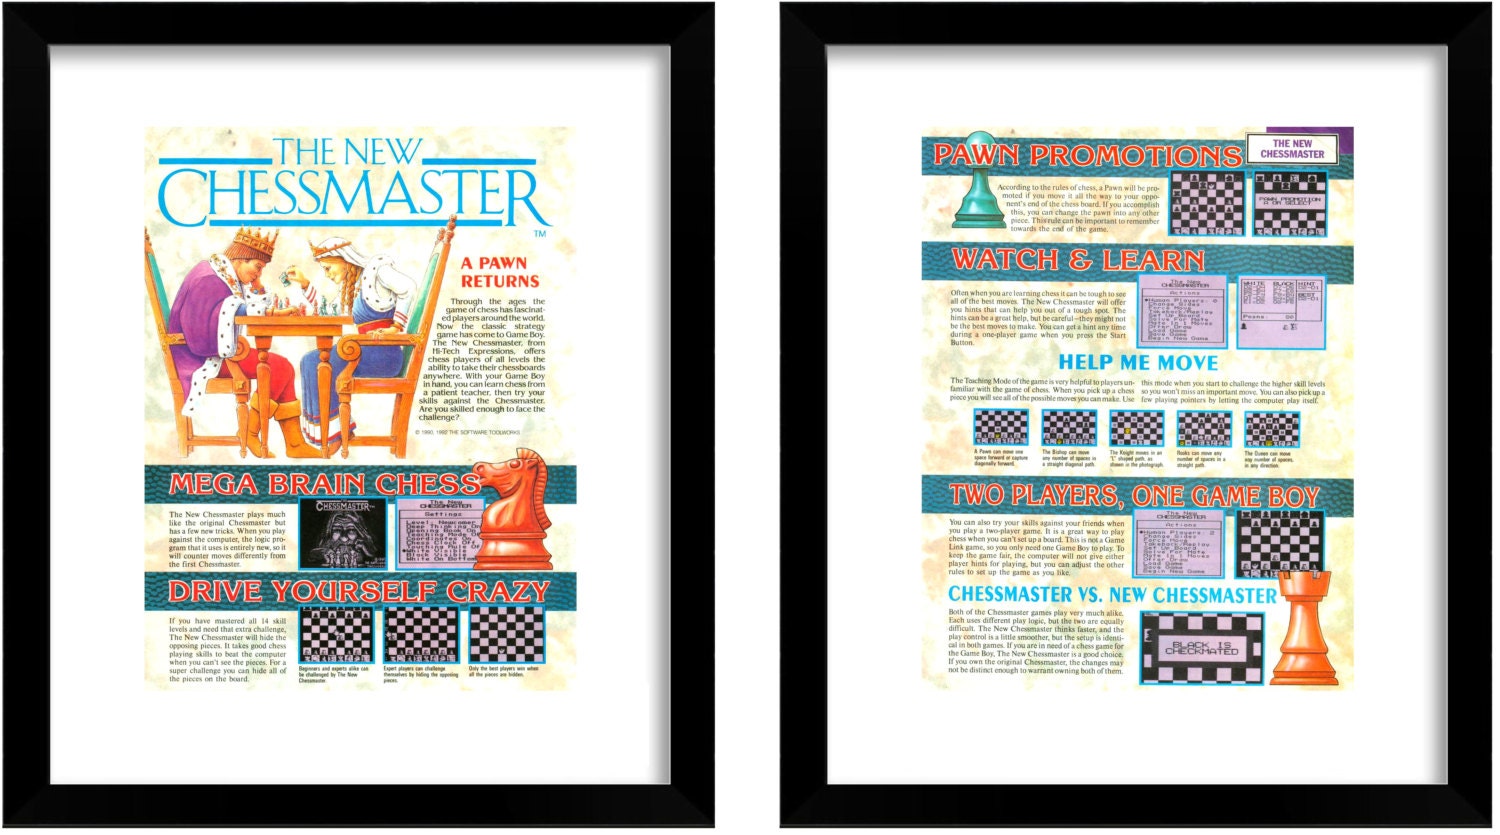 The Chessmaster Review (Game Boy)